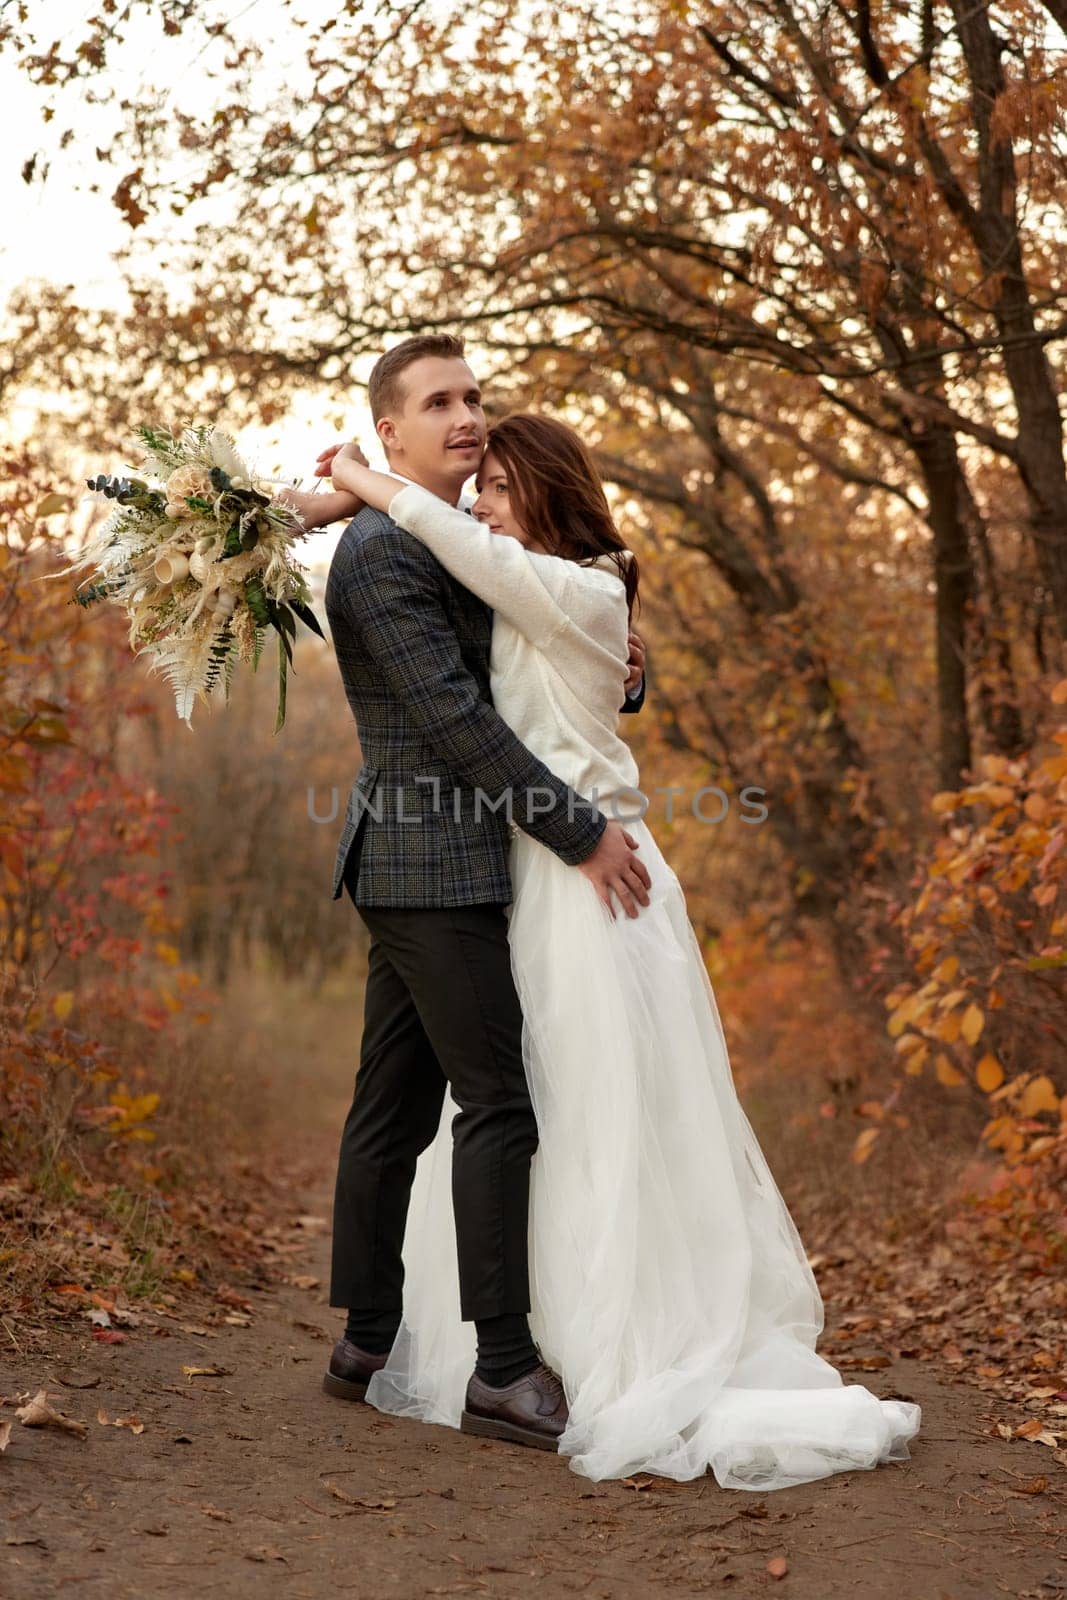 Full length body portrait of bride and groom standing outdoor on natural background